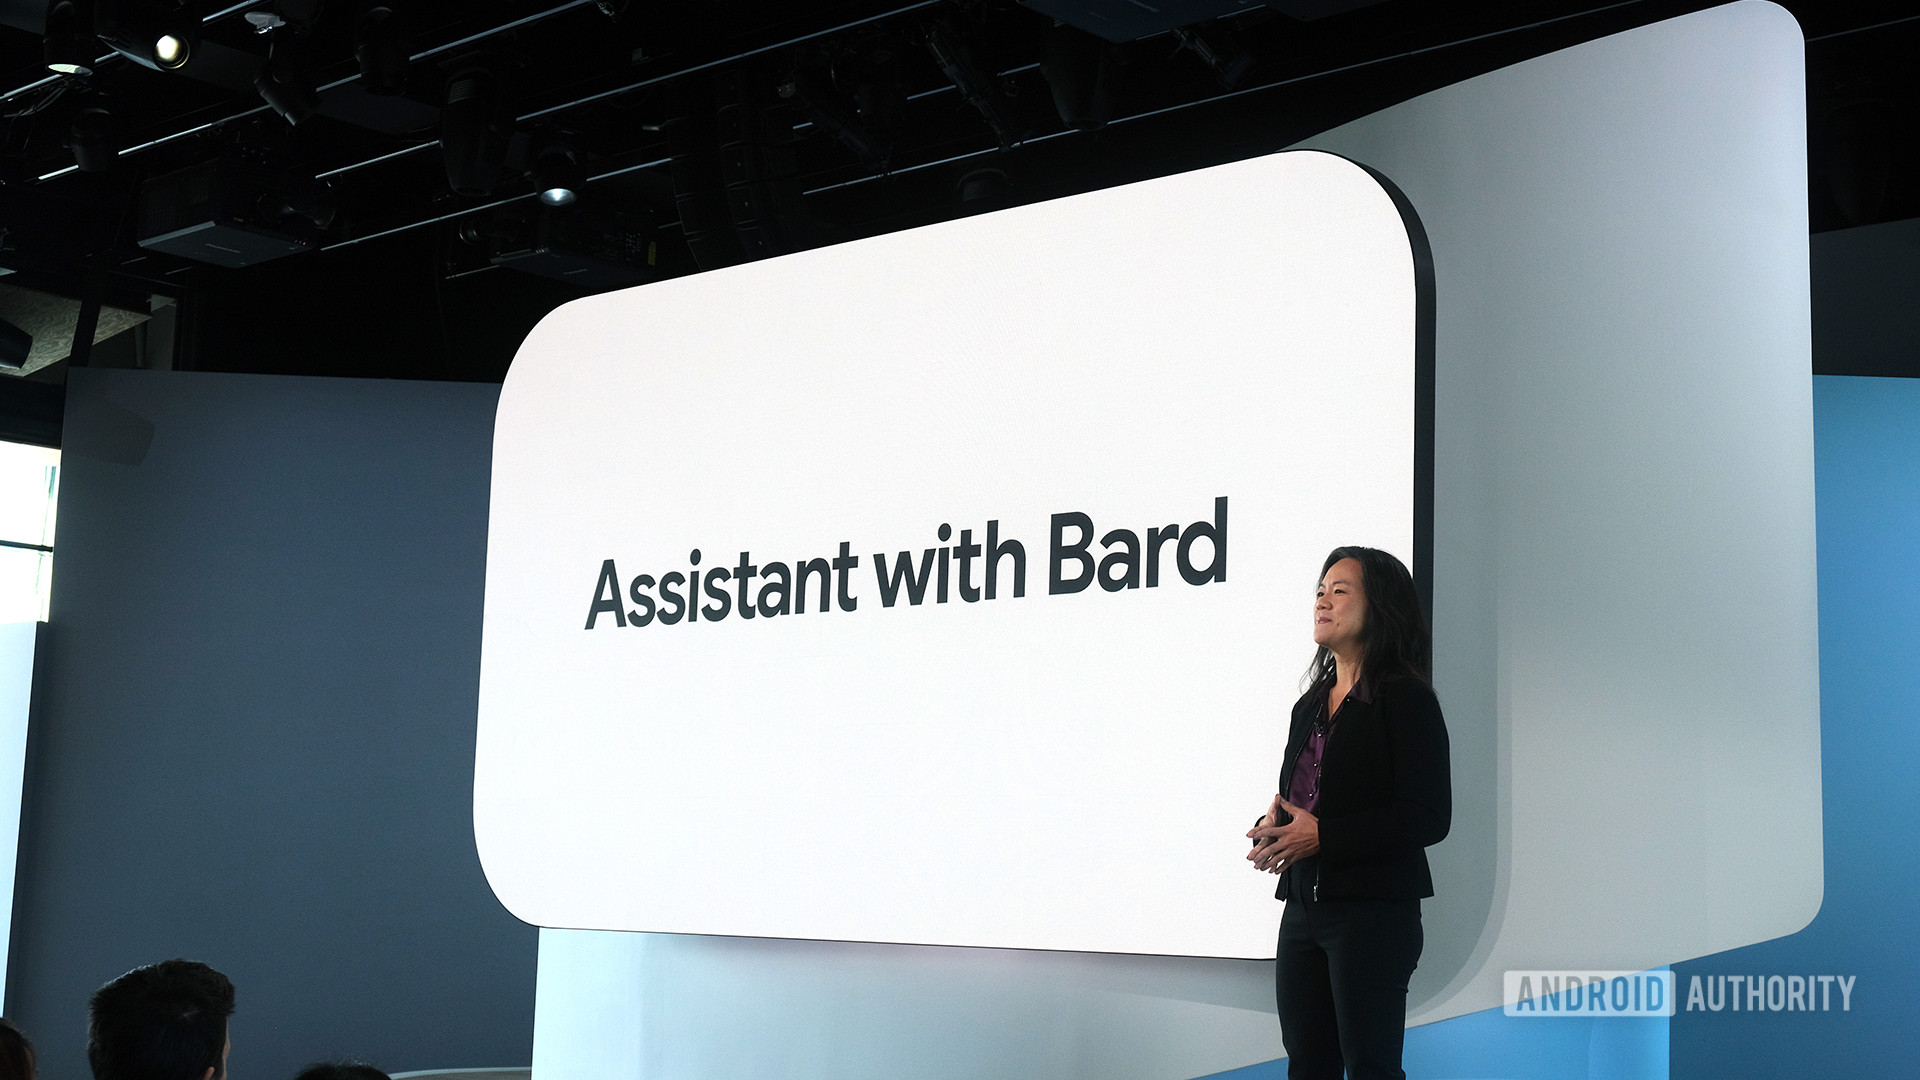 Image for article Heres what Google Assistant with Bard will look like on Android  Android Authority